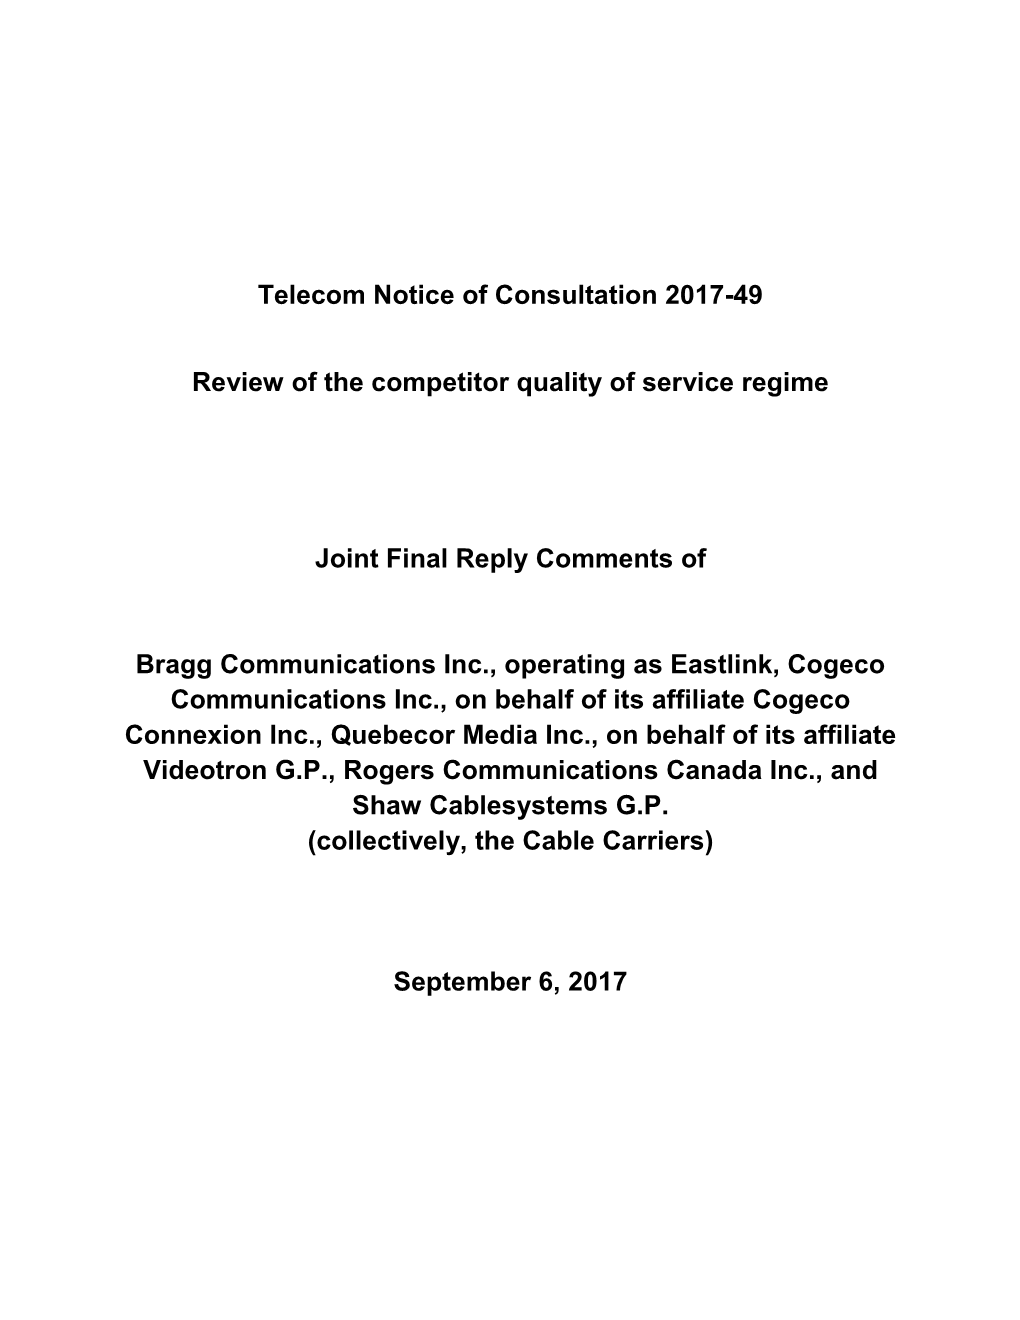 Telecom Notice of Consultation 2017-49 Review of the Competitor